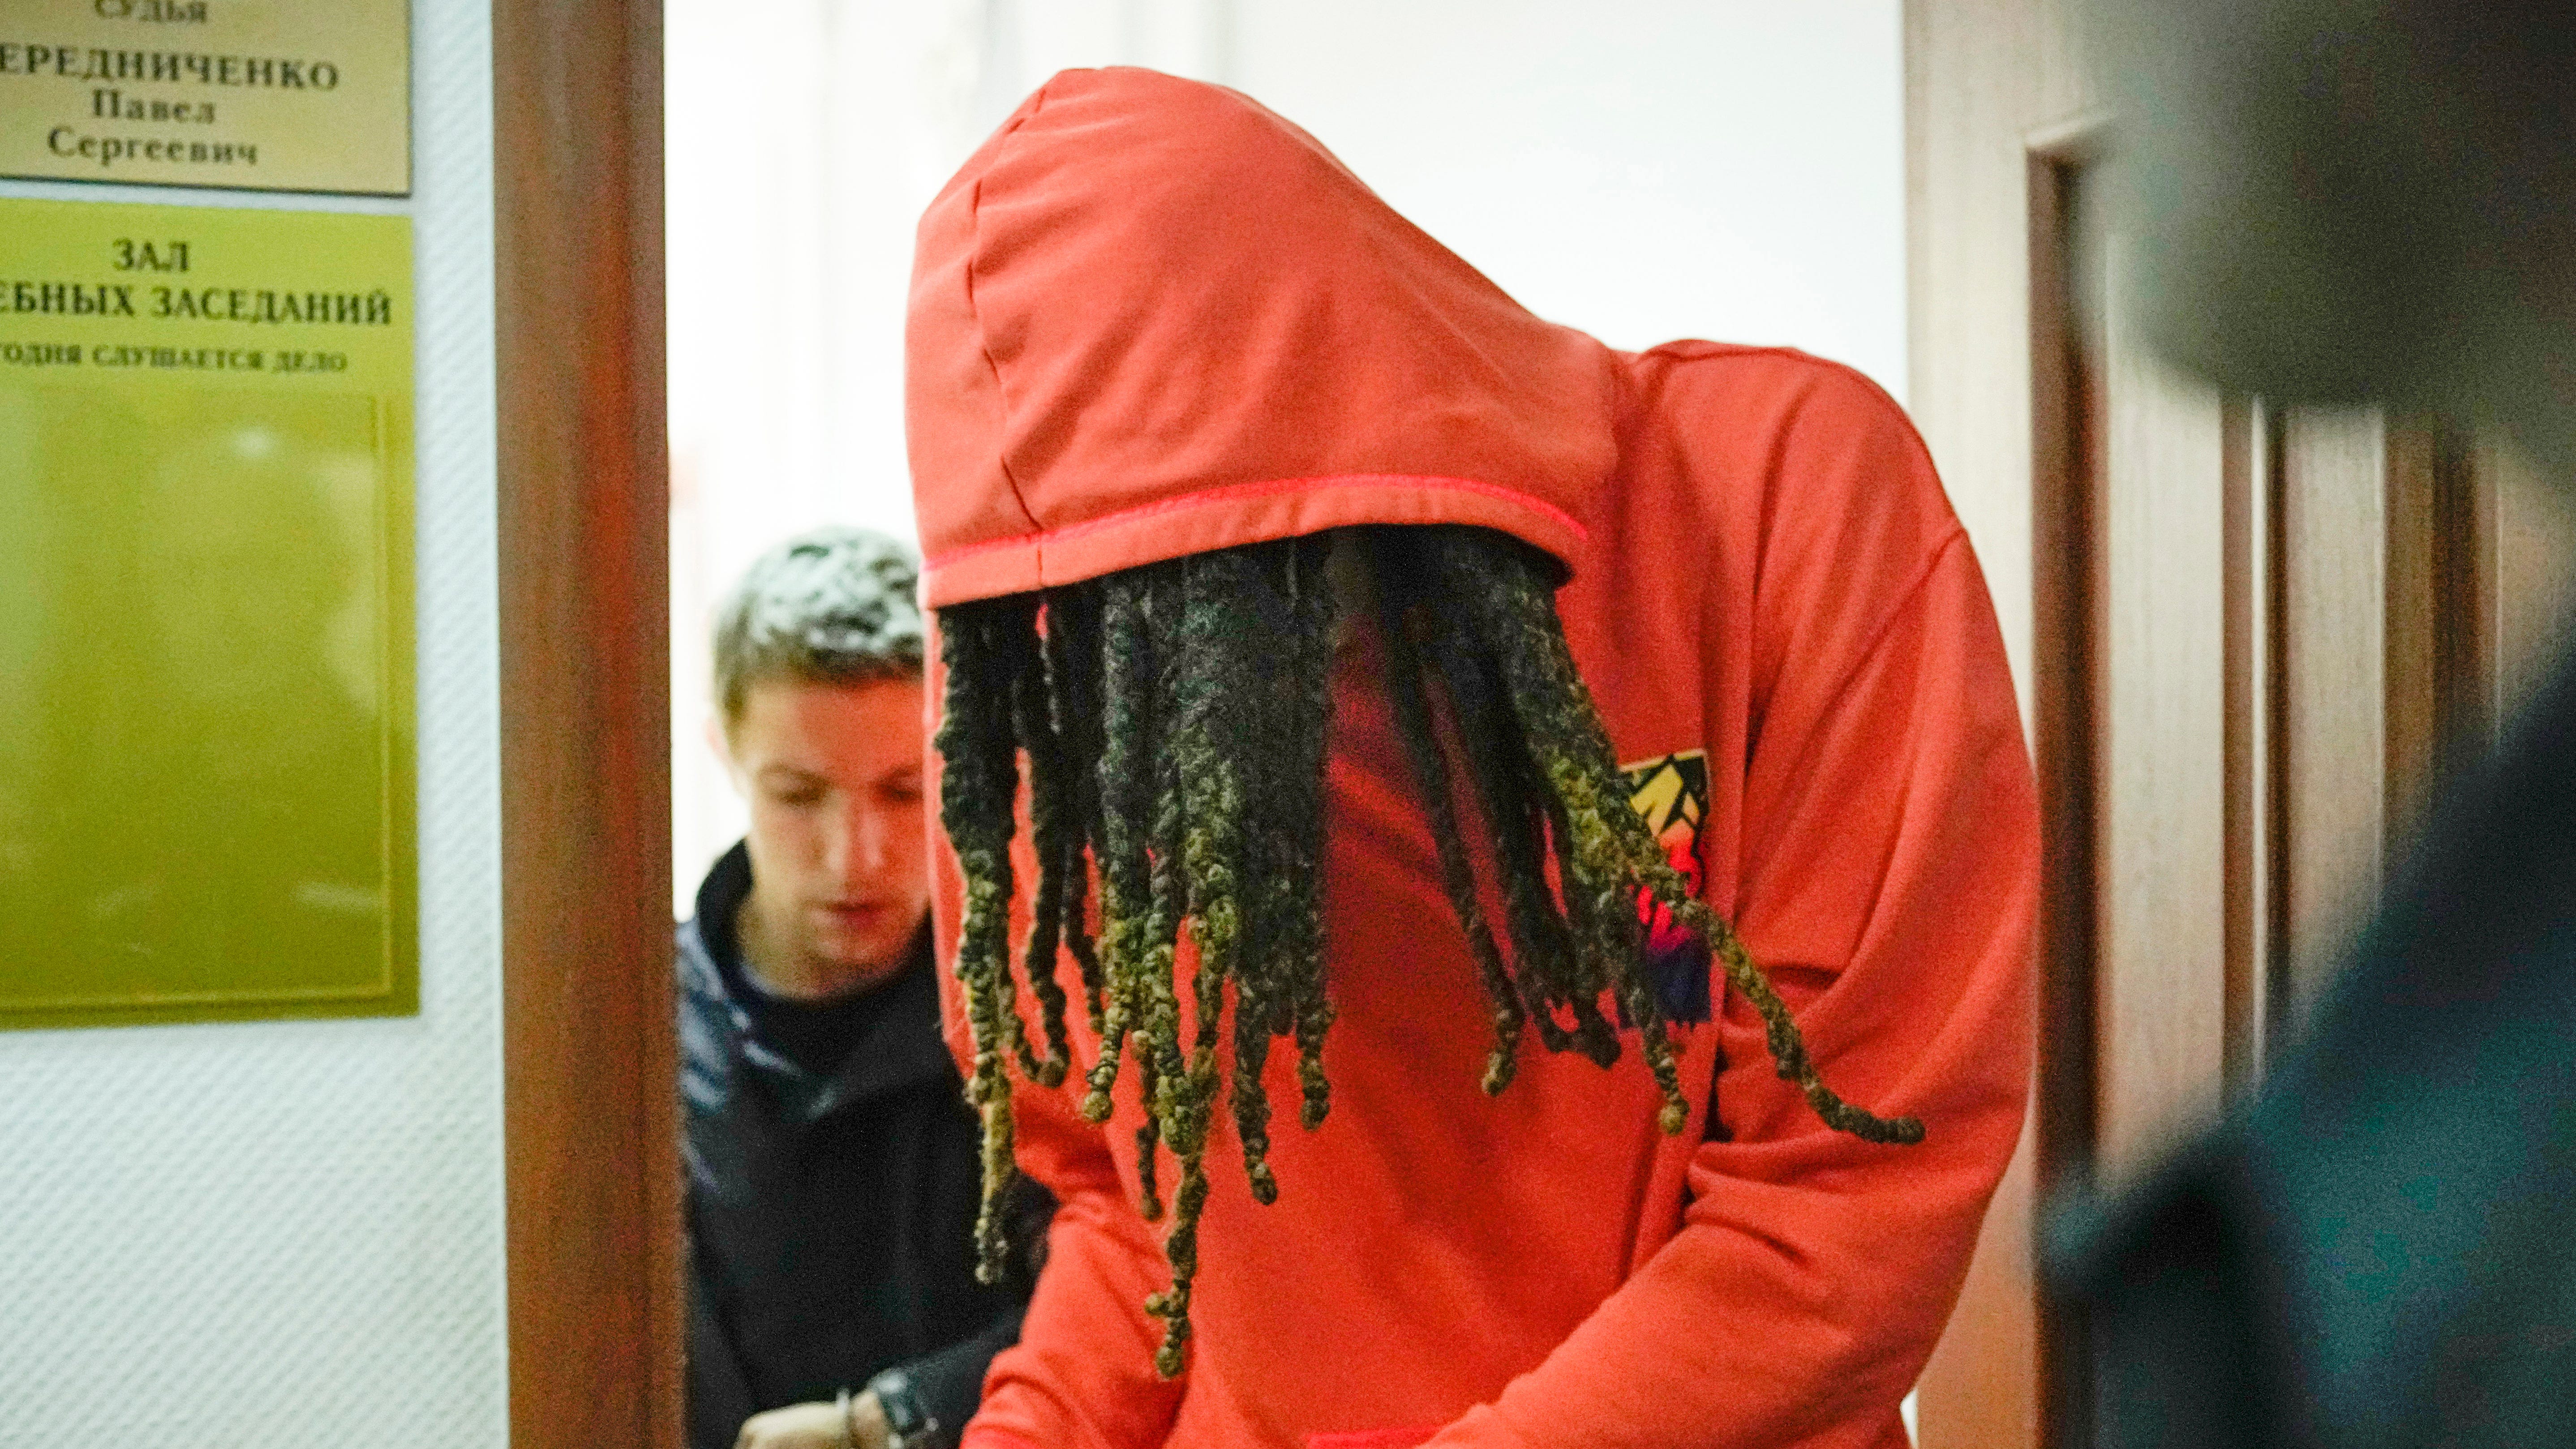 Brittney Griner leaves a courtroom after a hearing, in Khimki just outside Moscow, May 13, 2022.